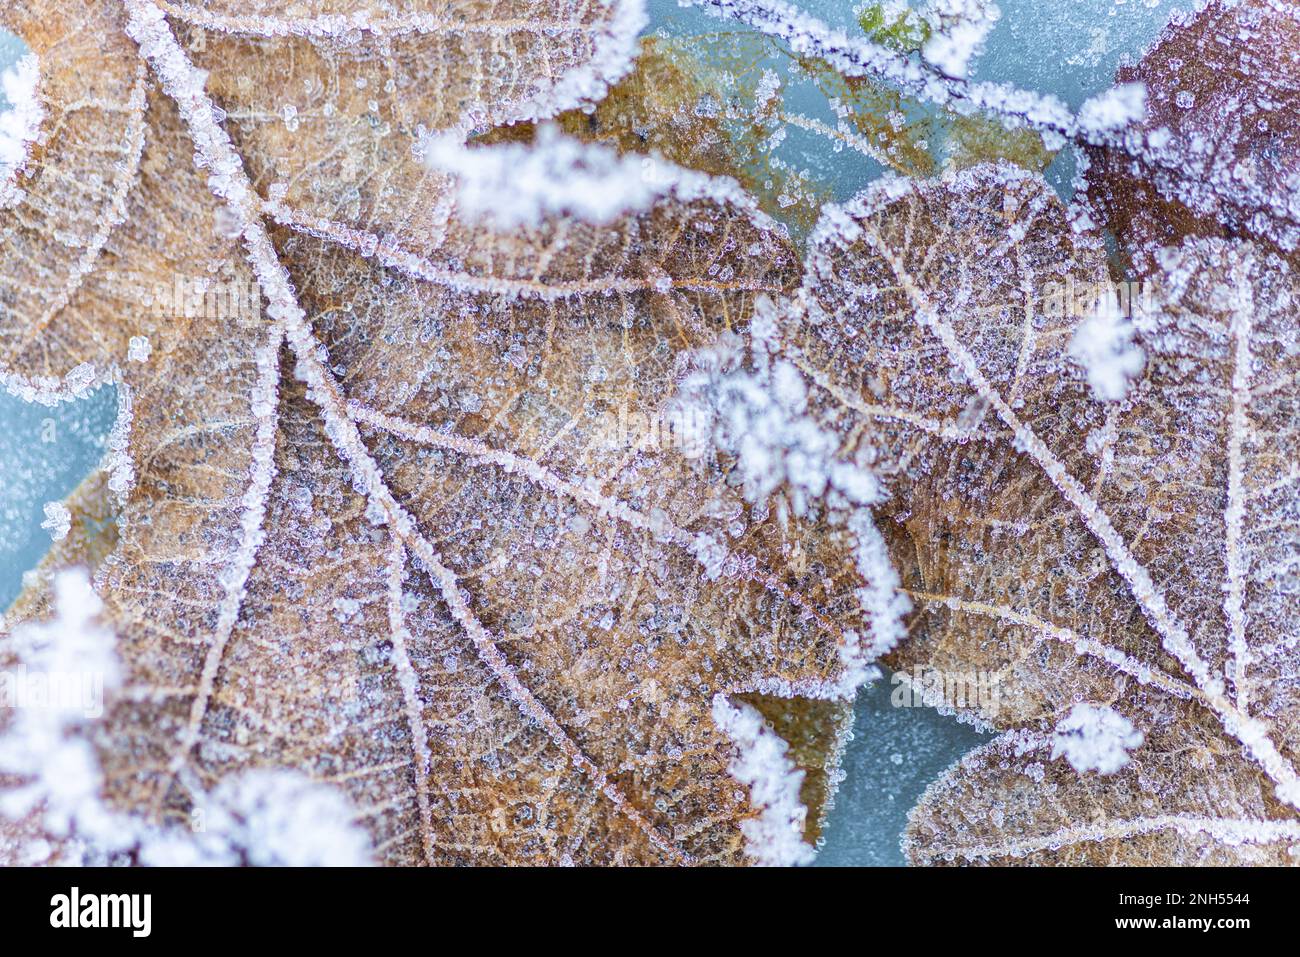 Nature winter background snow snowflakes falling on frozen oak leaves in ice Stock Photo